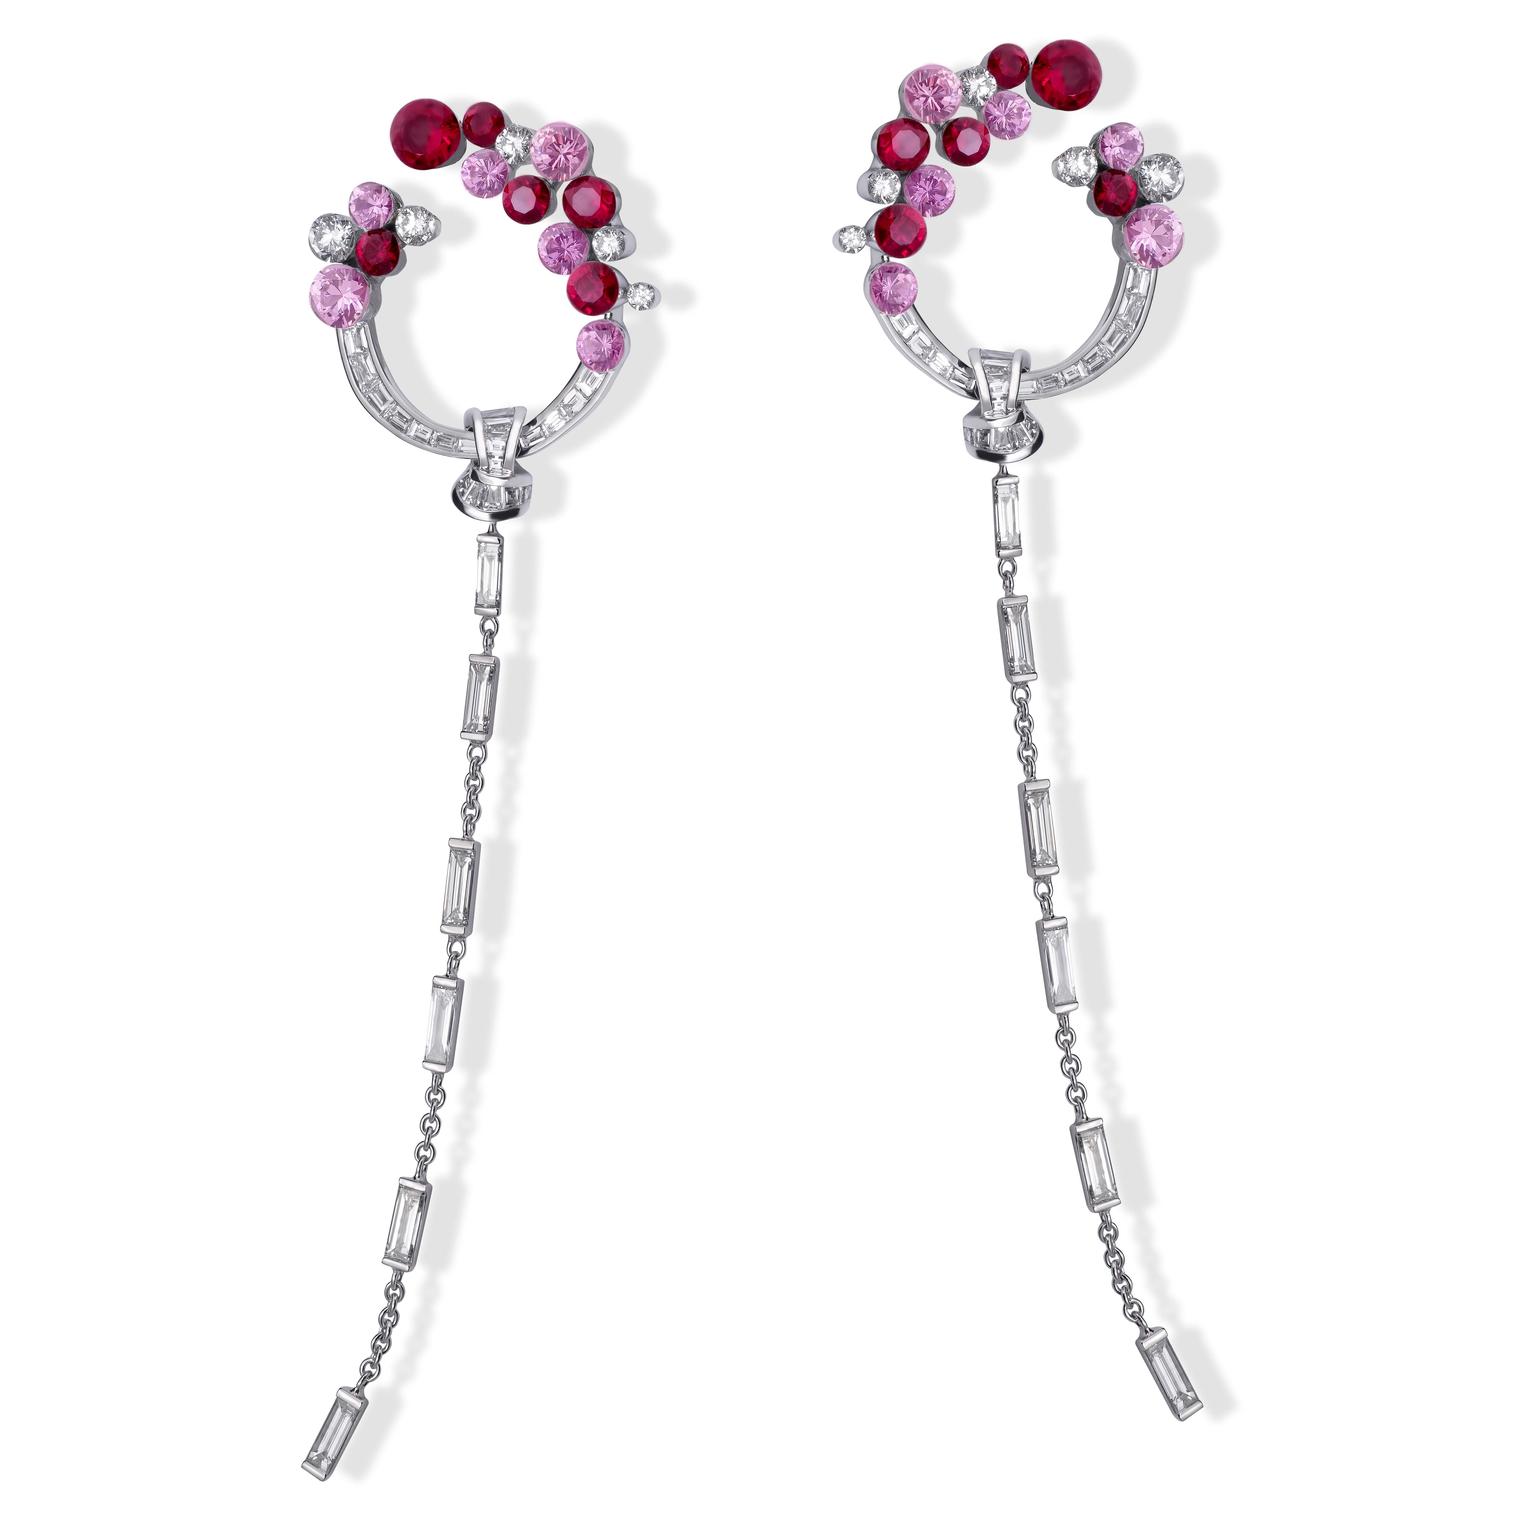 Stenzhorn Una ruby and pink sapphire earrings